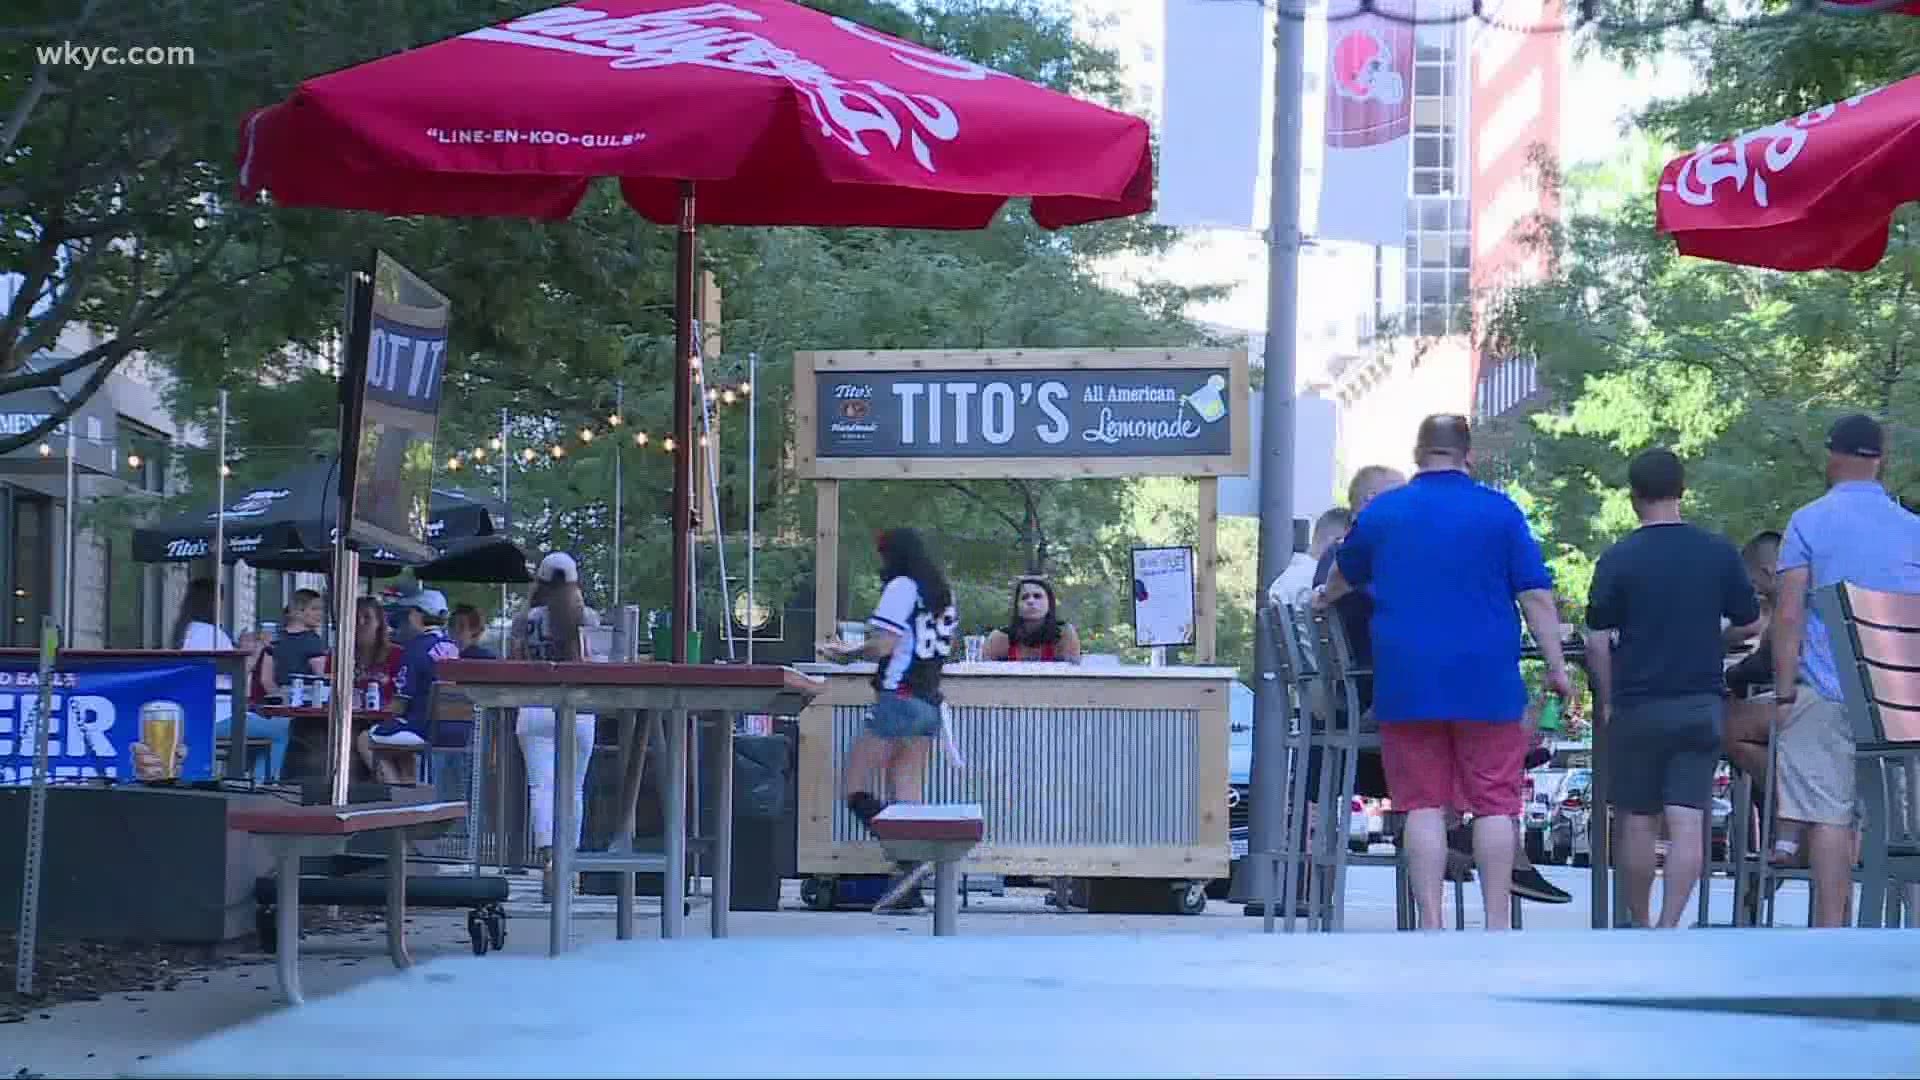 Downtown Cleveland bars limited fans on Opening Day due to the coronavirus. Laura Caso has more on a different looking scene outside of Progressive Field.